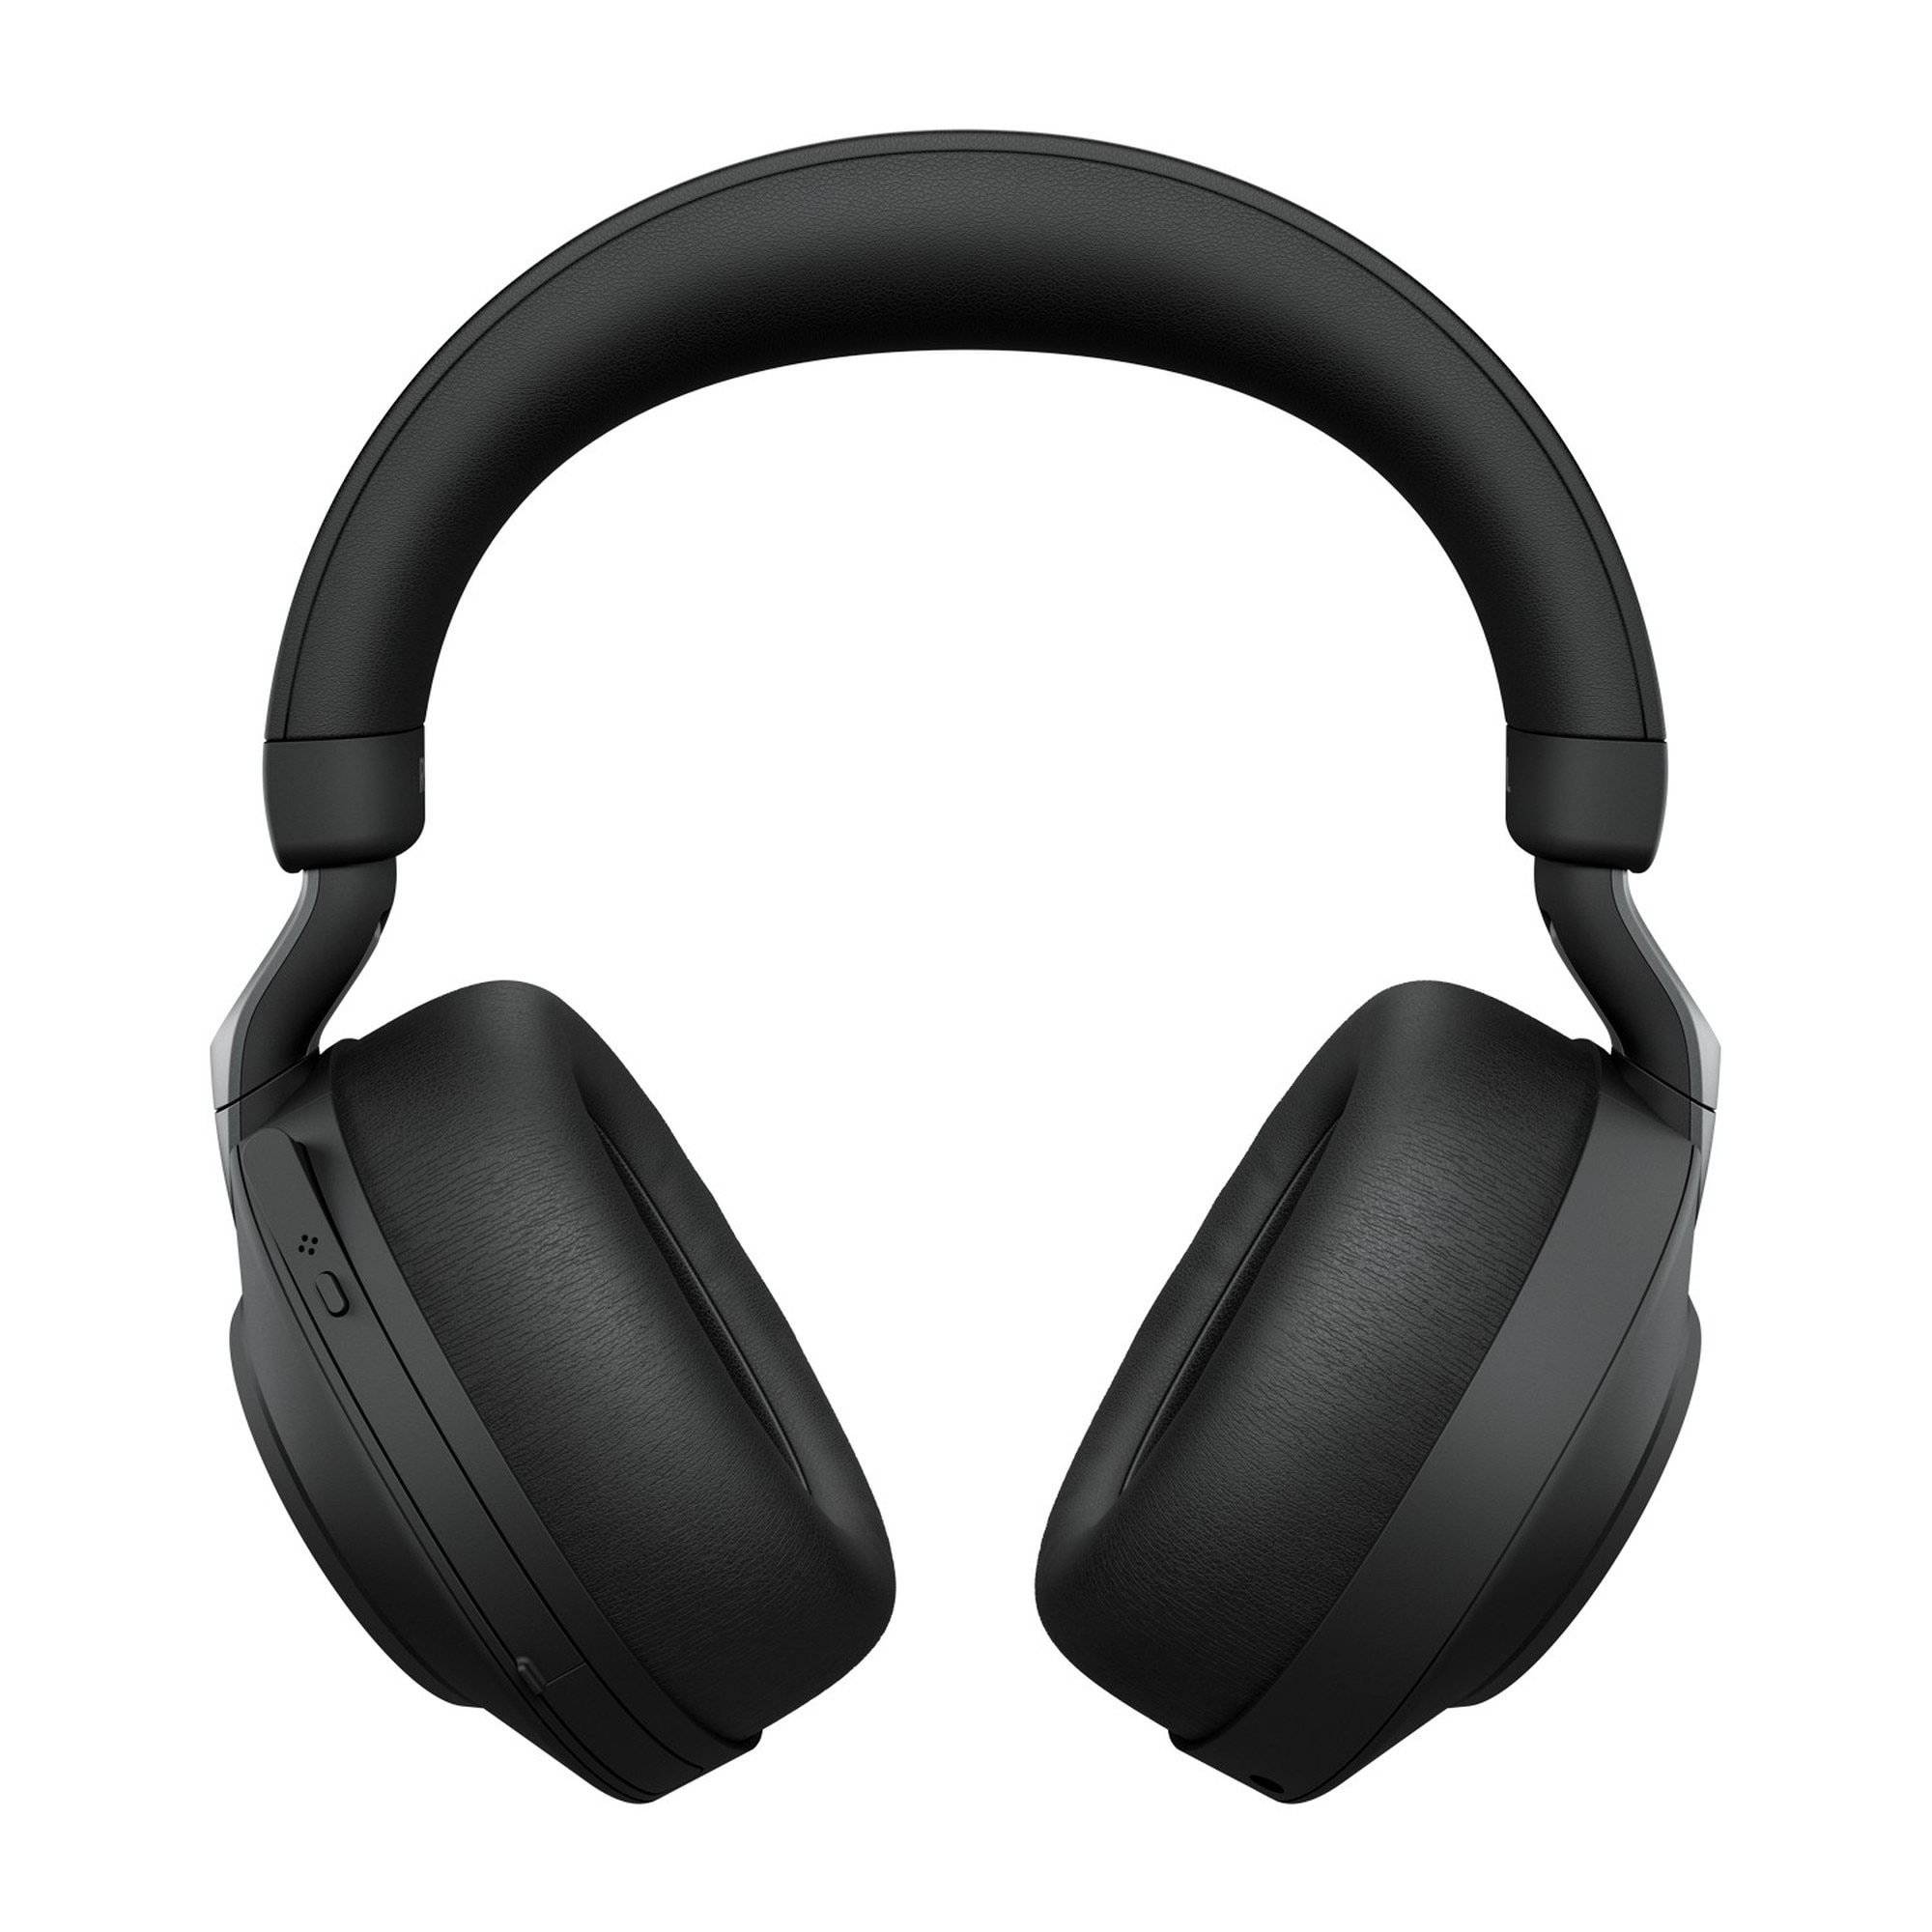 JABRA Evolve2 85 MS Stereo Professional Wireless Headset With USB LINK380A 28599-999-999 - Buy Singapore